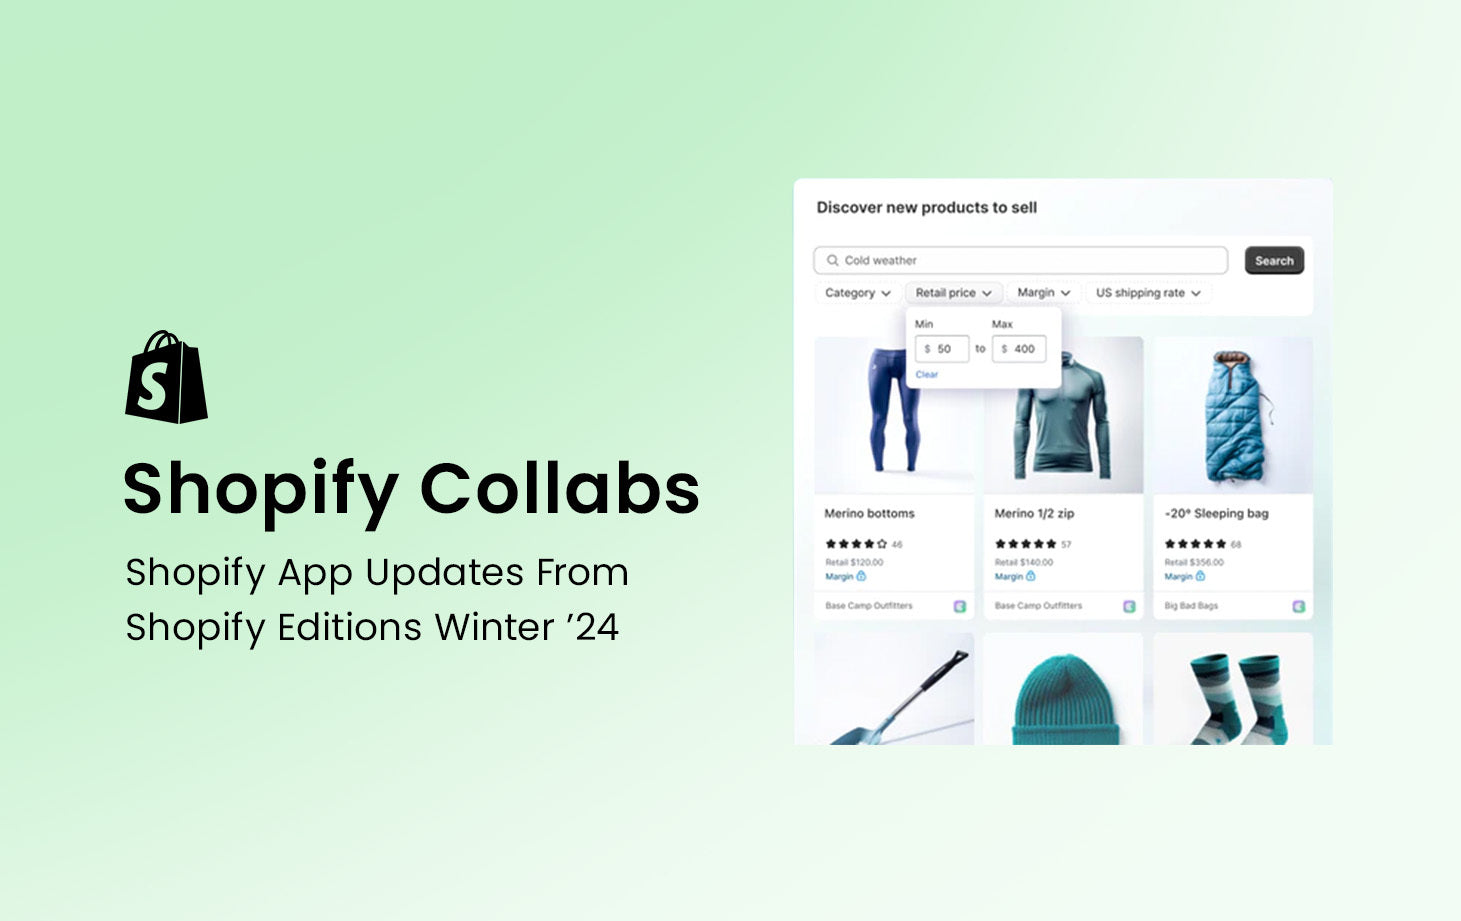 Shopify Collabs: Shopify App Updates From Shopify Editions Winter ’24